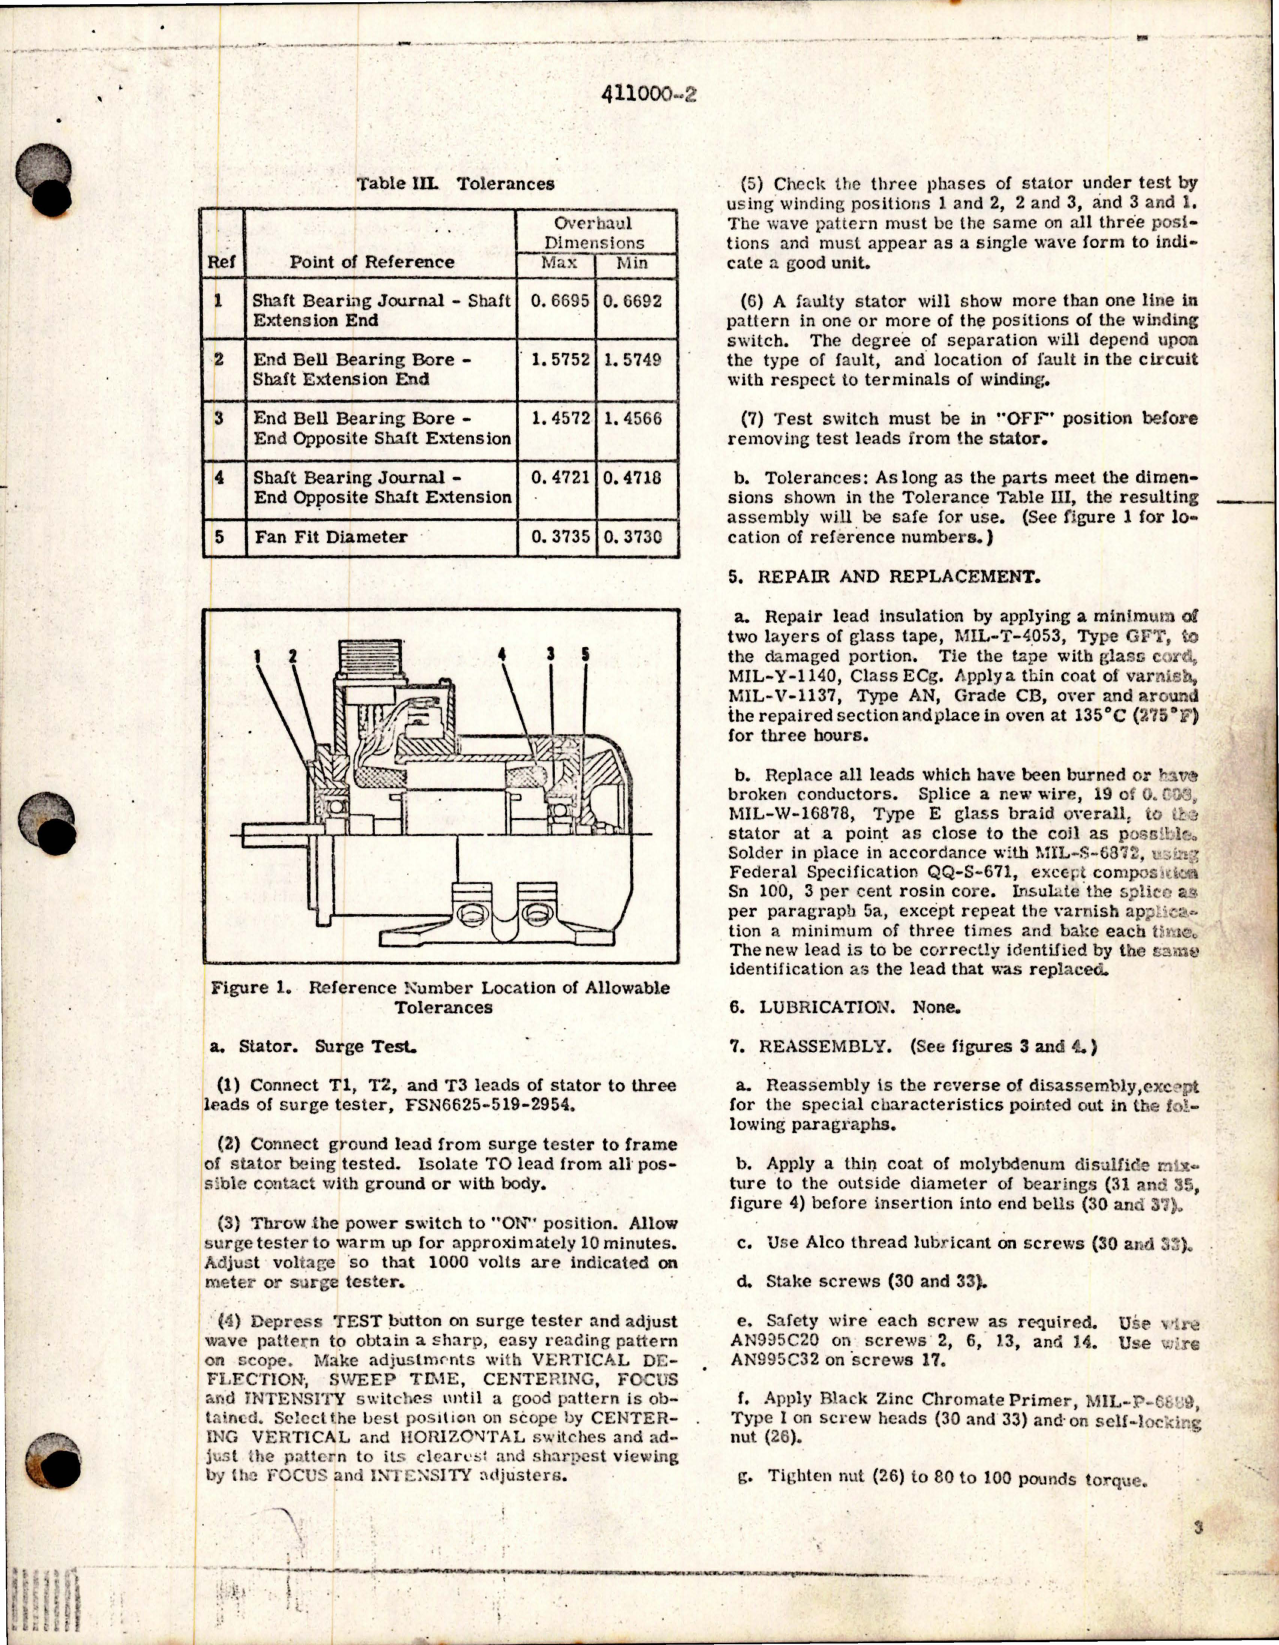 Sample page 7 from AirCorps Library document: Overhaul Instructions with Illustrated Parts Breakdown for Suction Boost Hydraulic Pump - Part 411000-2 